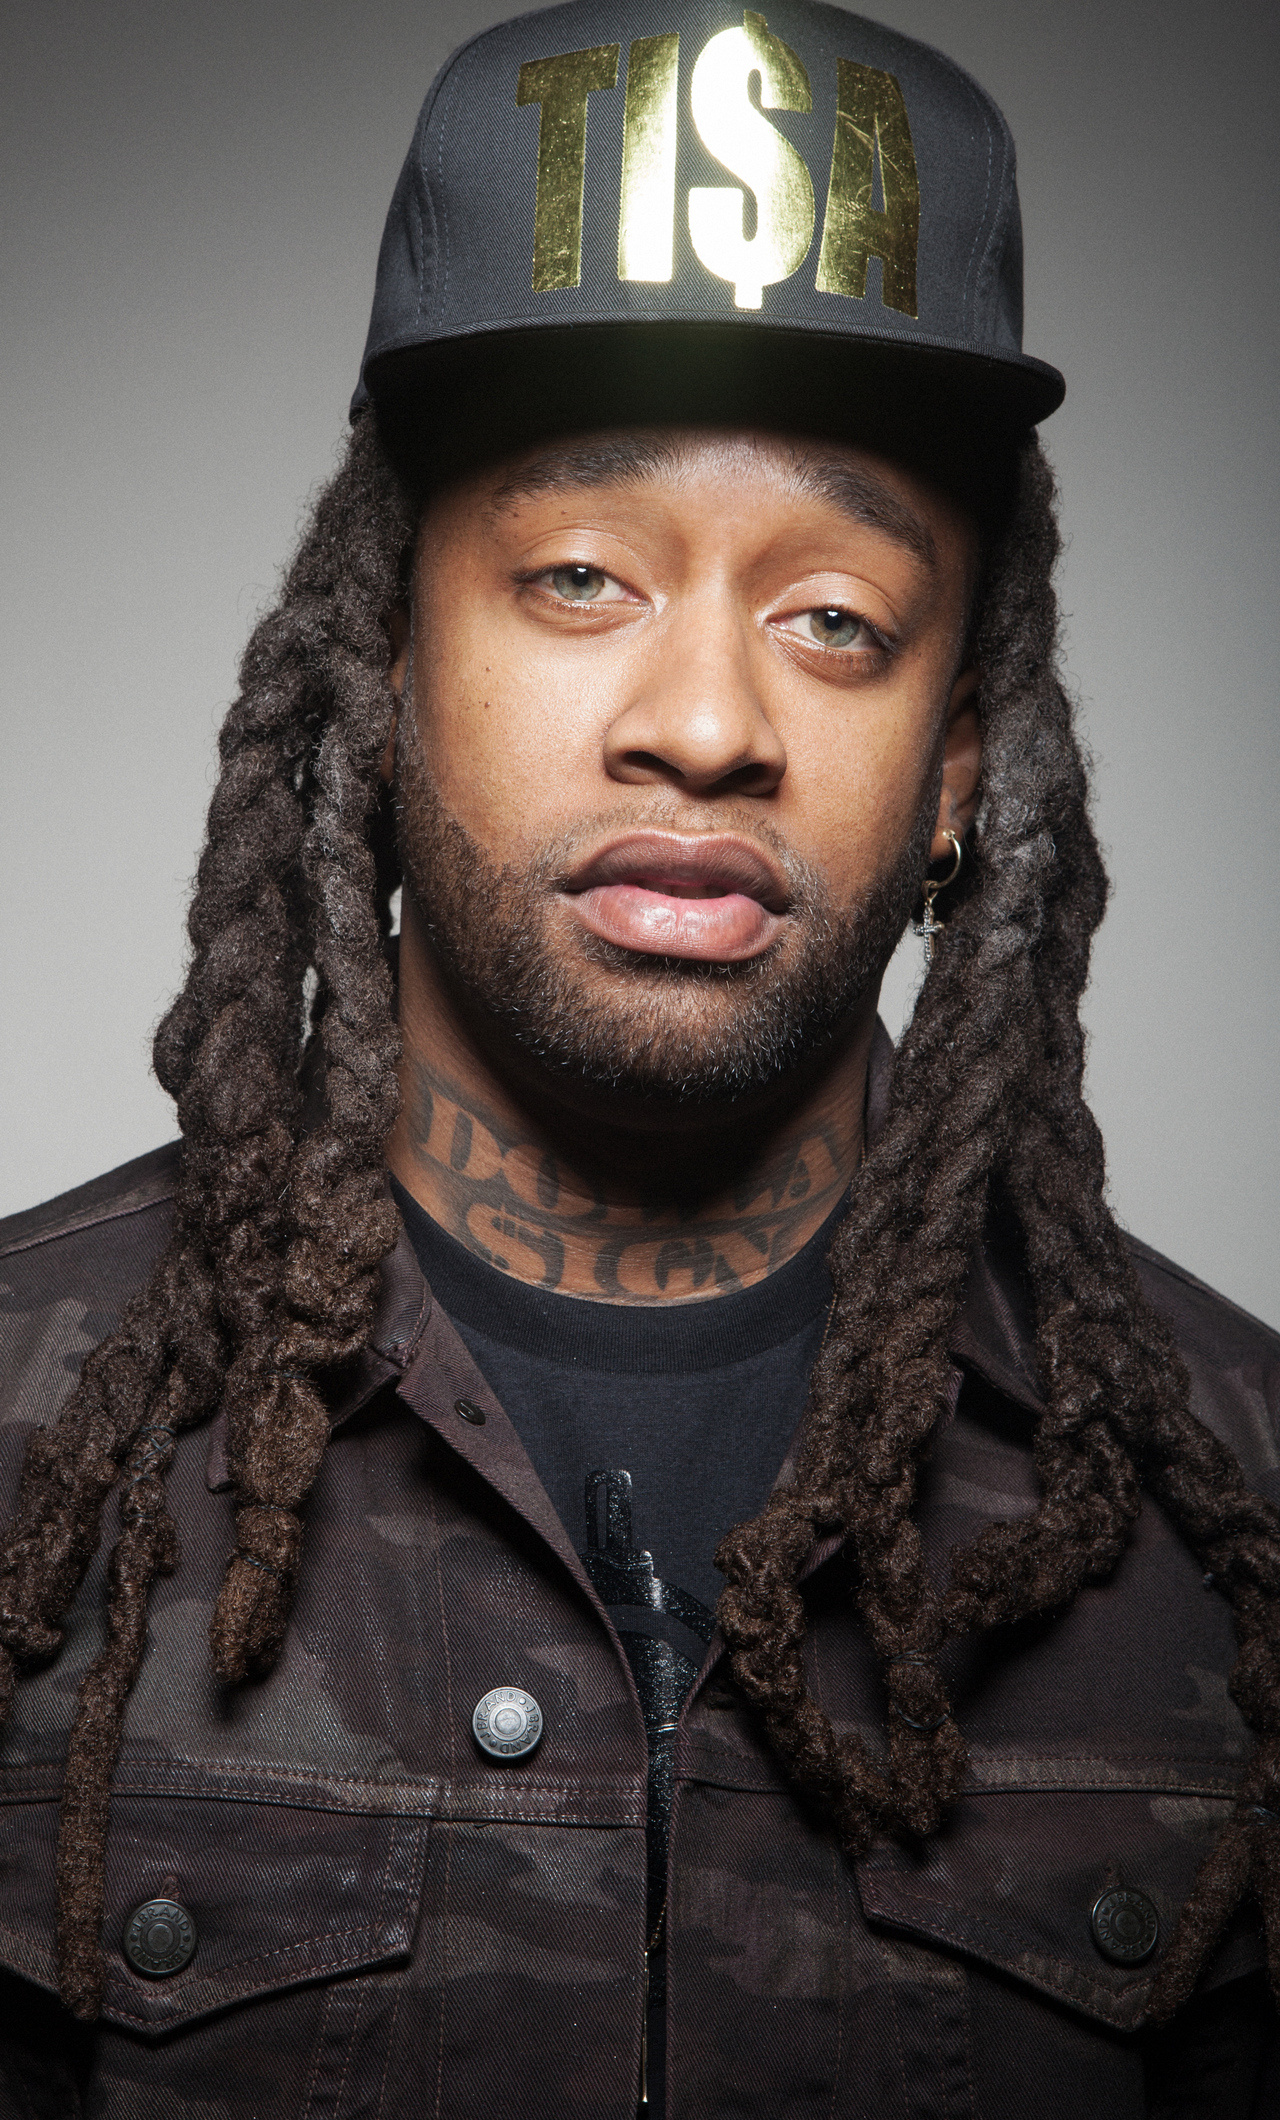 Ty Dolla Sign, iPhone 6 wallpaper, HD images, High-quality photos, 1280x2120 HD Handy